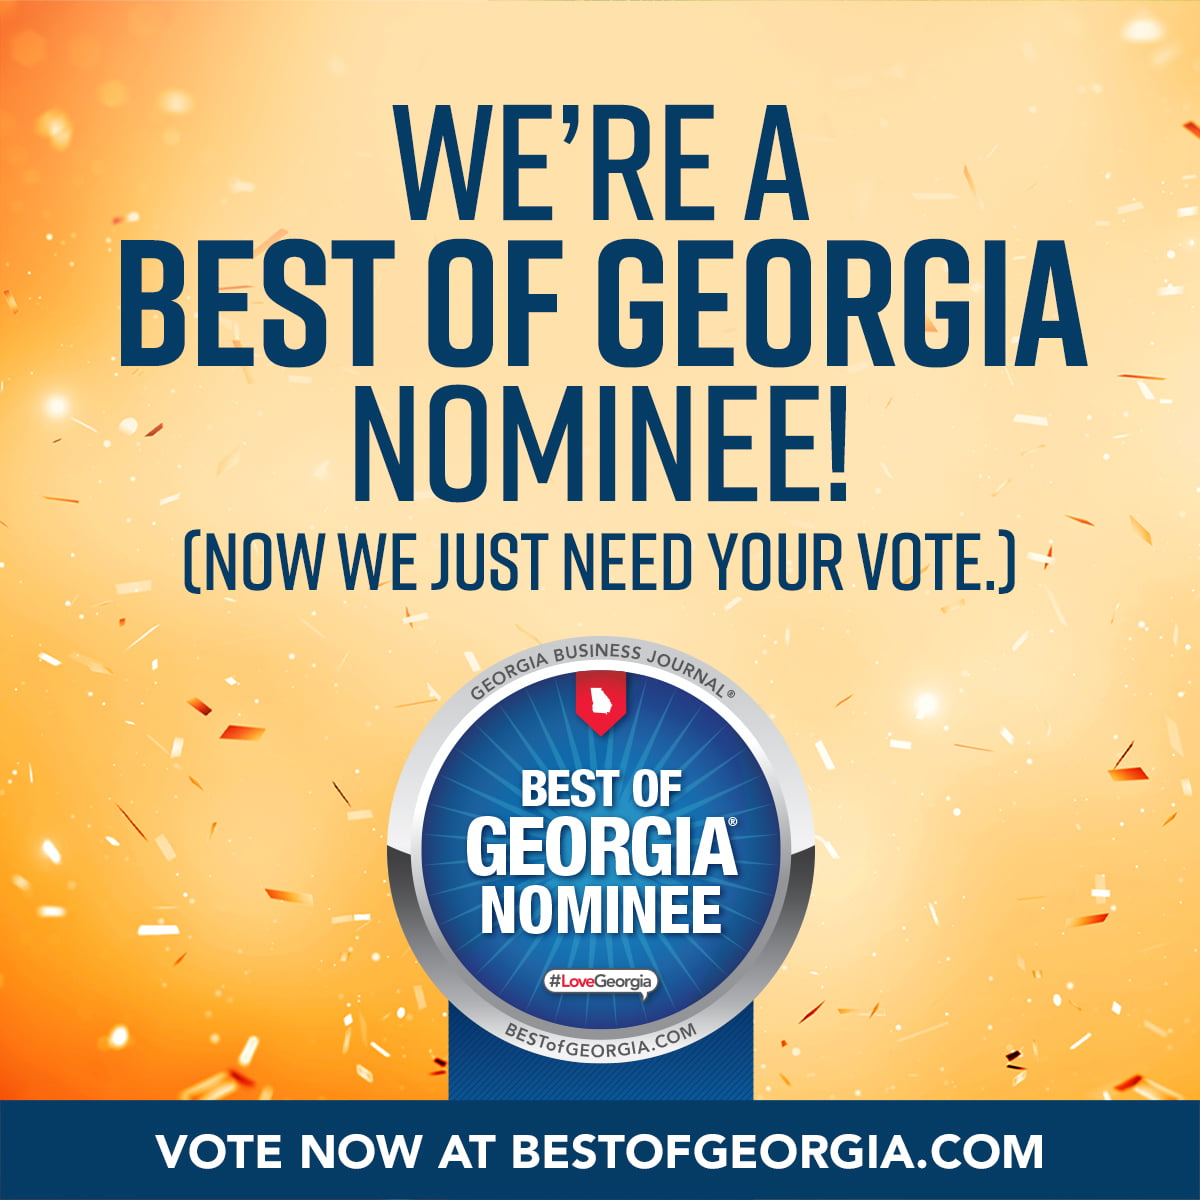 We're a best of georgia nominee badge - vote for us!